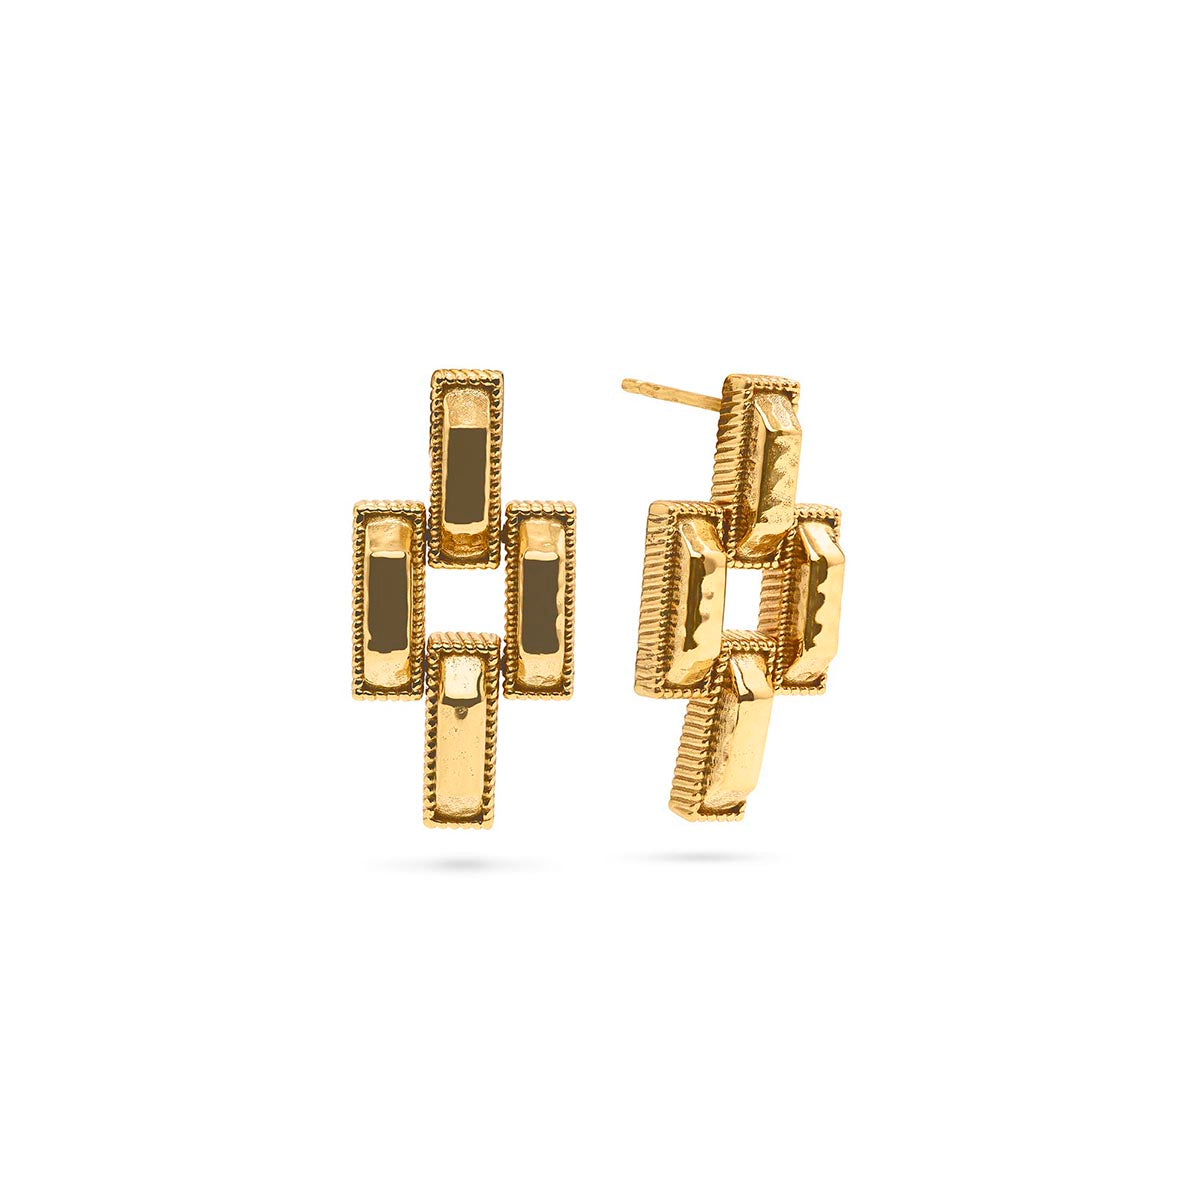 Pathway Post Small Link Earrings